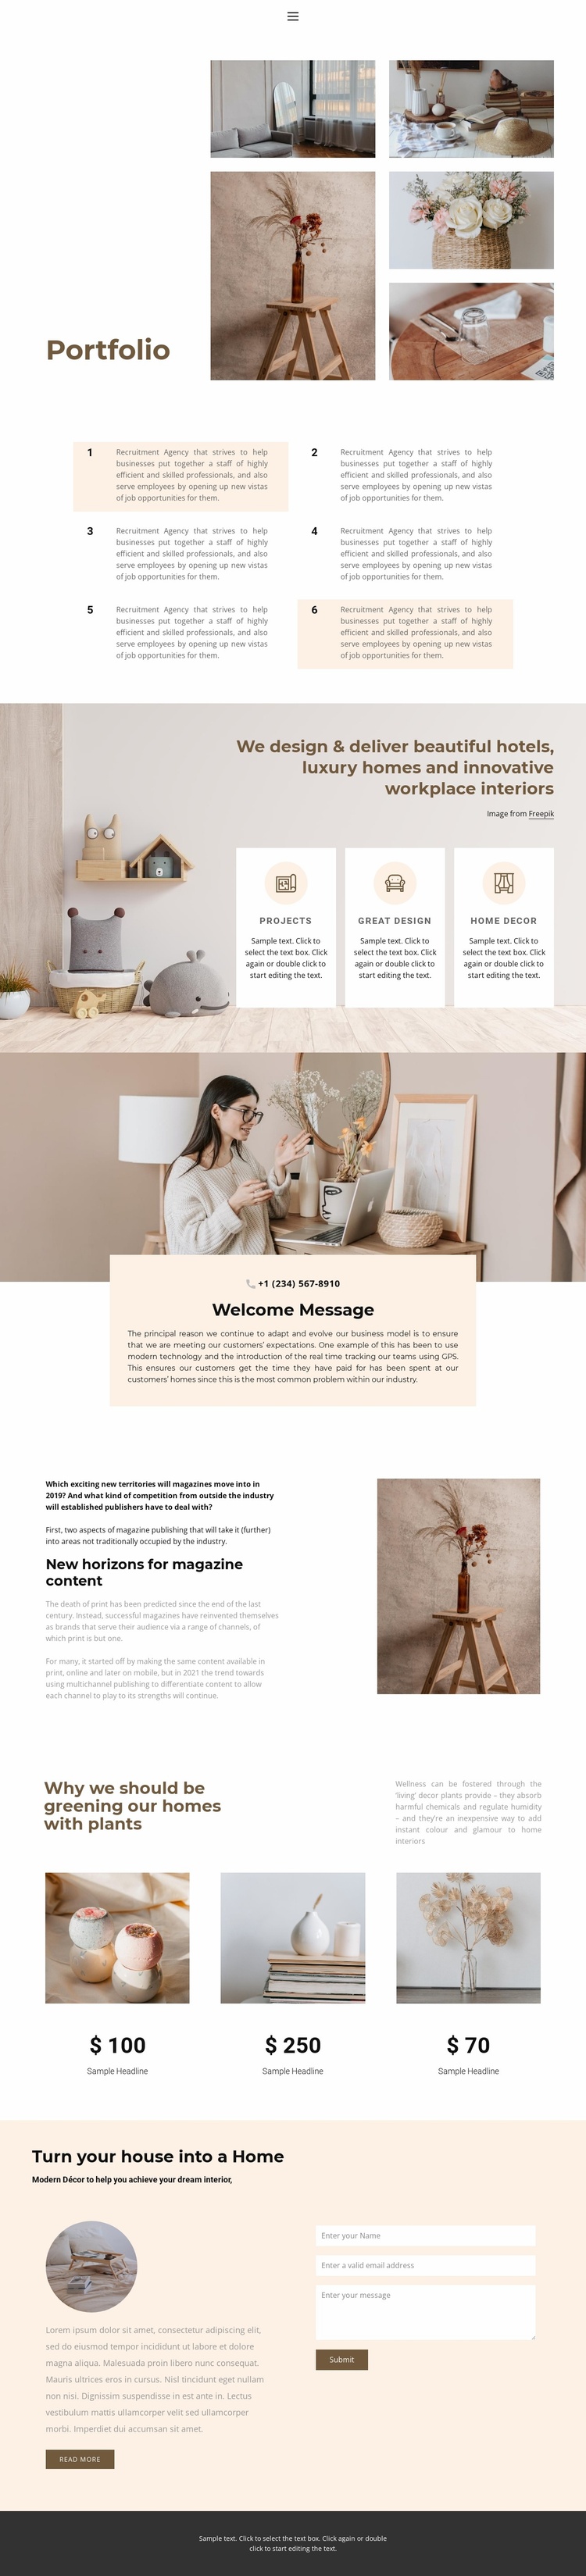 Decorate your home Website Template